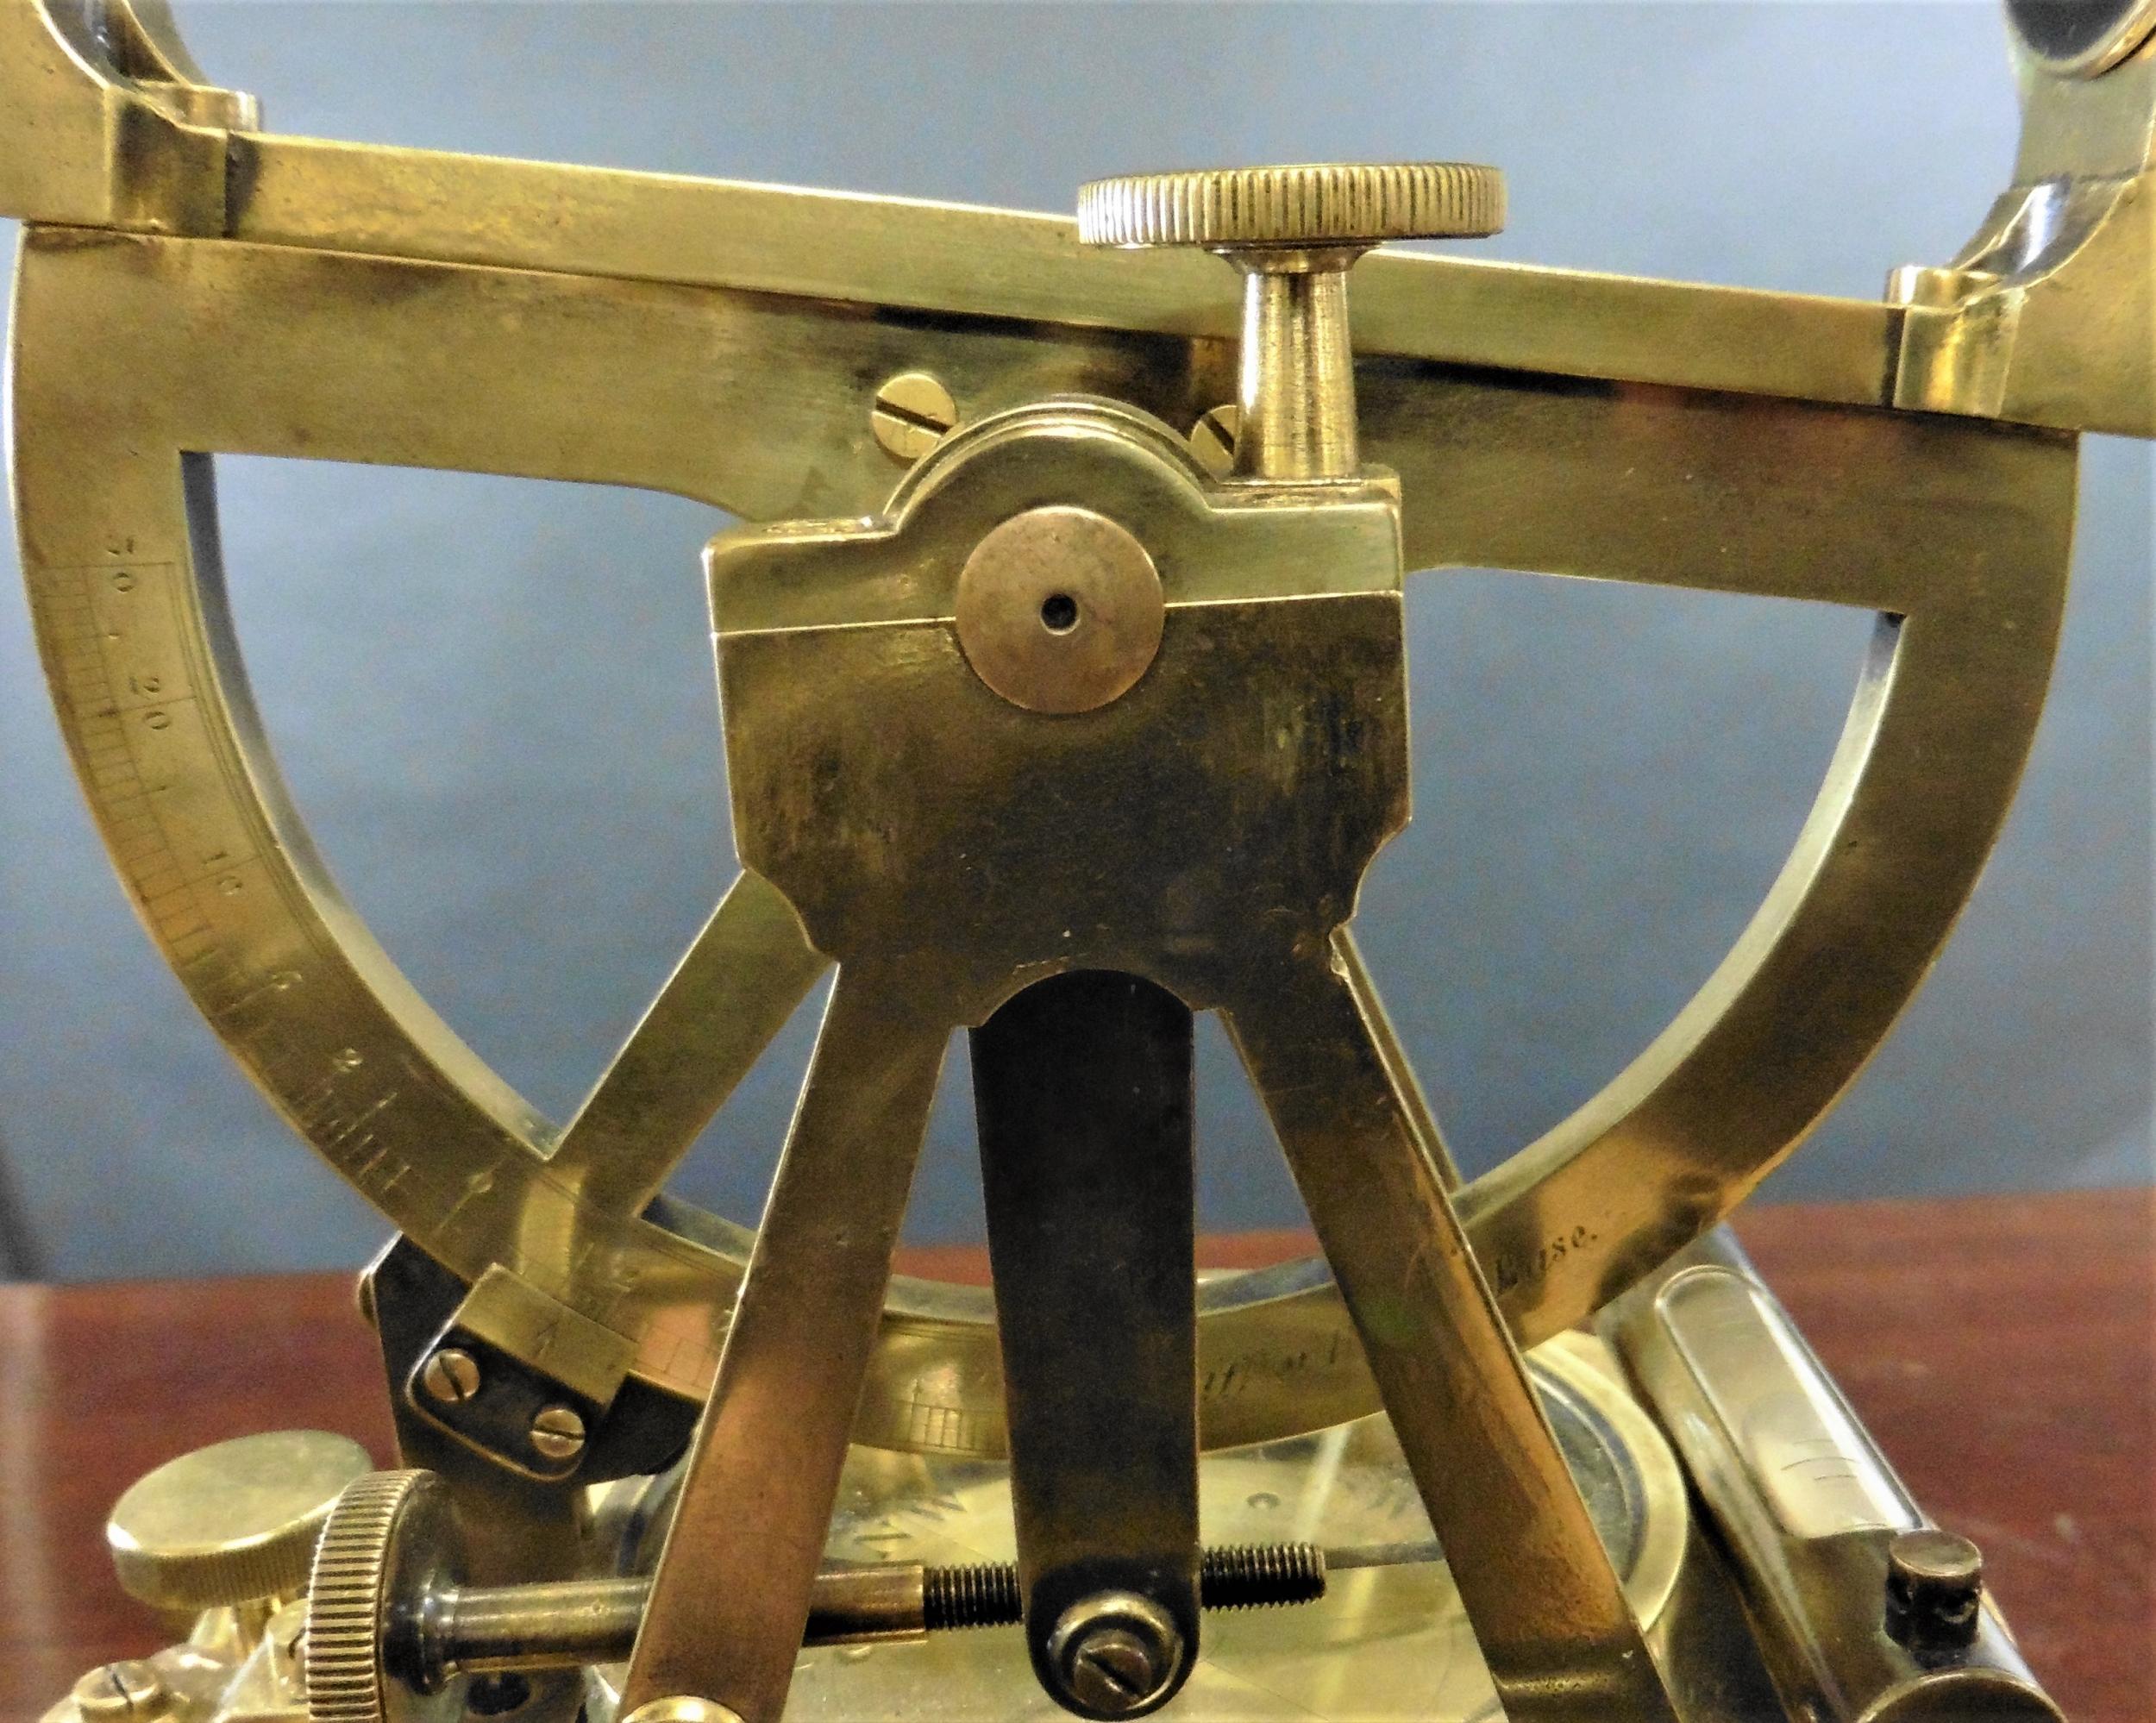 19th century lacquered brass theodolite by S.P.Cohen, Glasgow


Extending telescope with rack and pinion focusing and centrally mounted spirit level, located on the limb with twin clamps, half vertical circle inset with vernier scale marked from